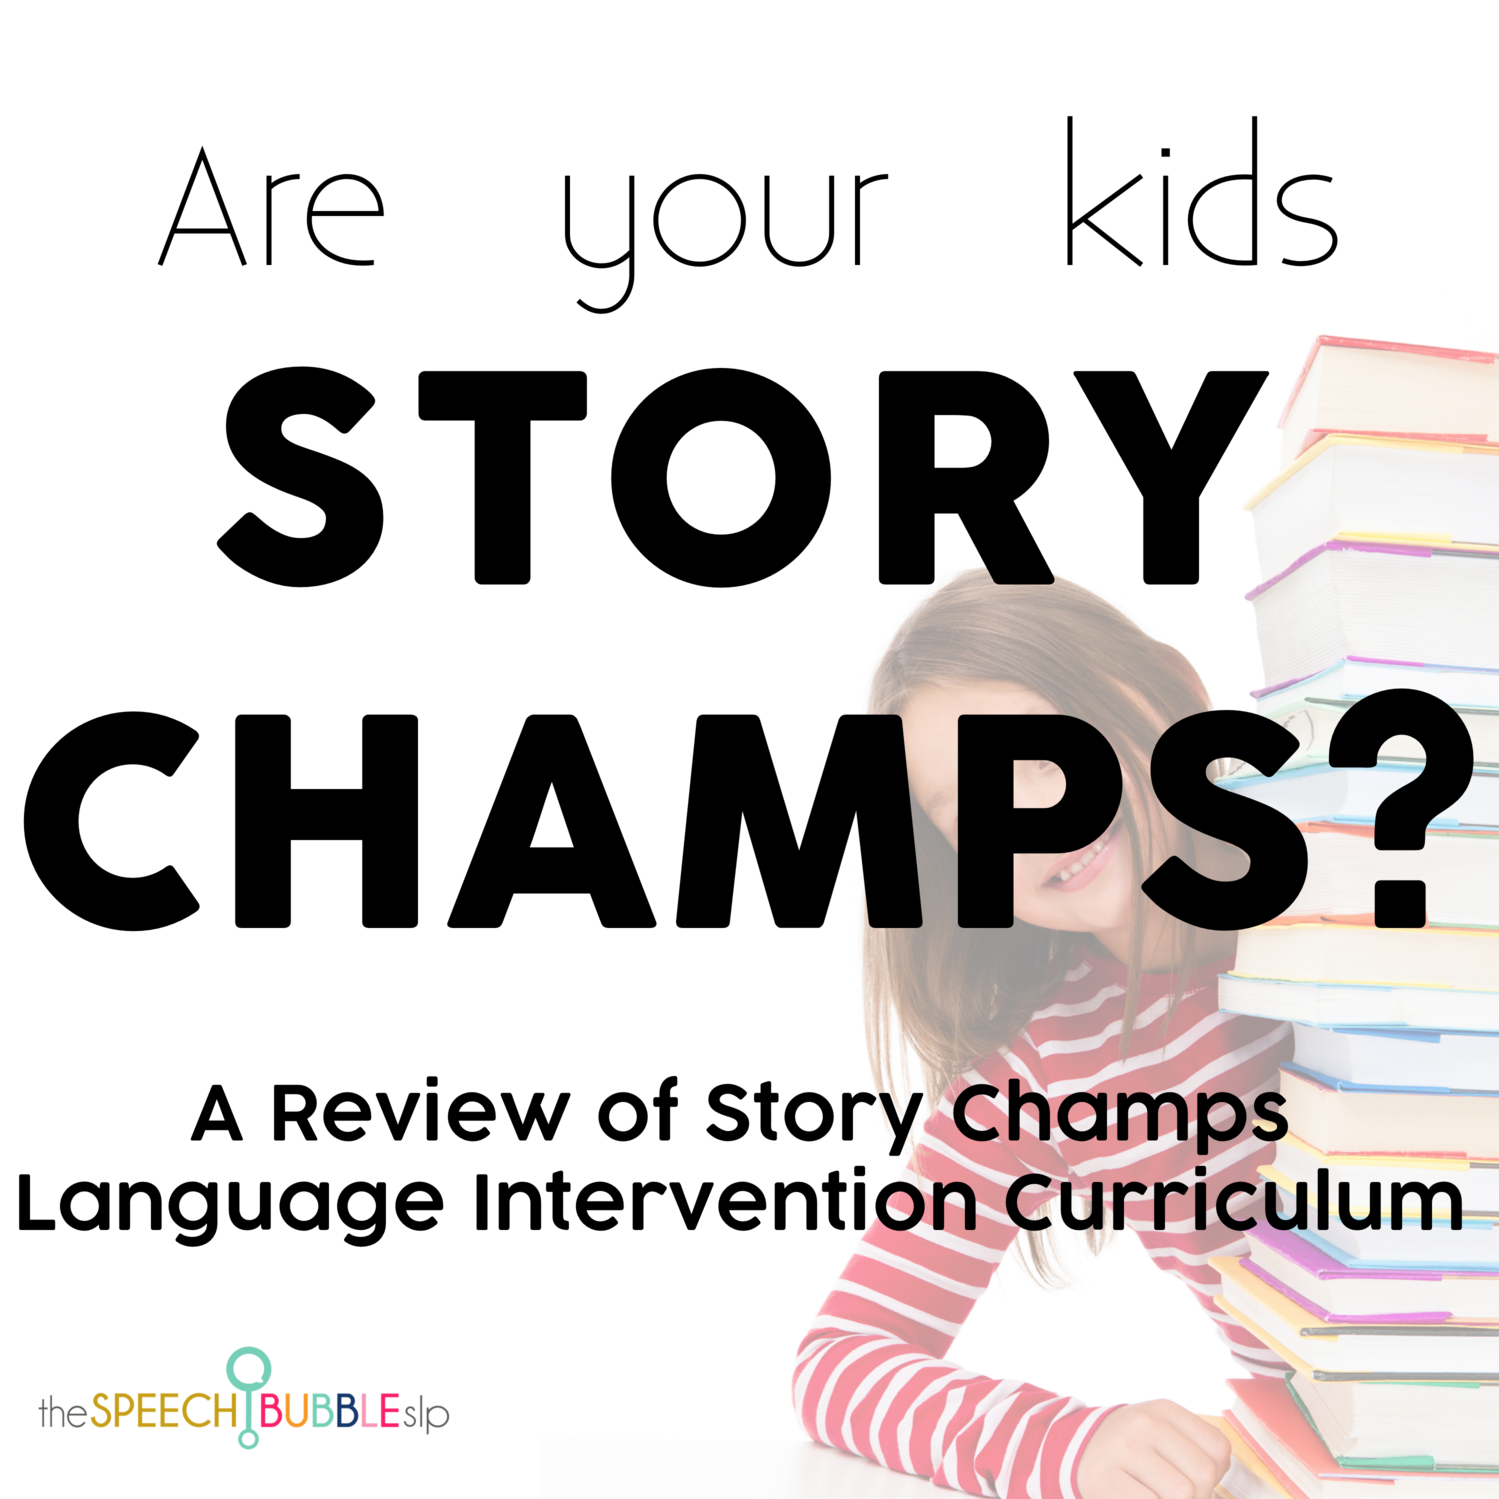 Are your kids Story Champs?